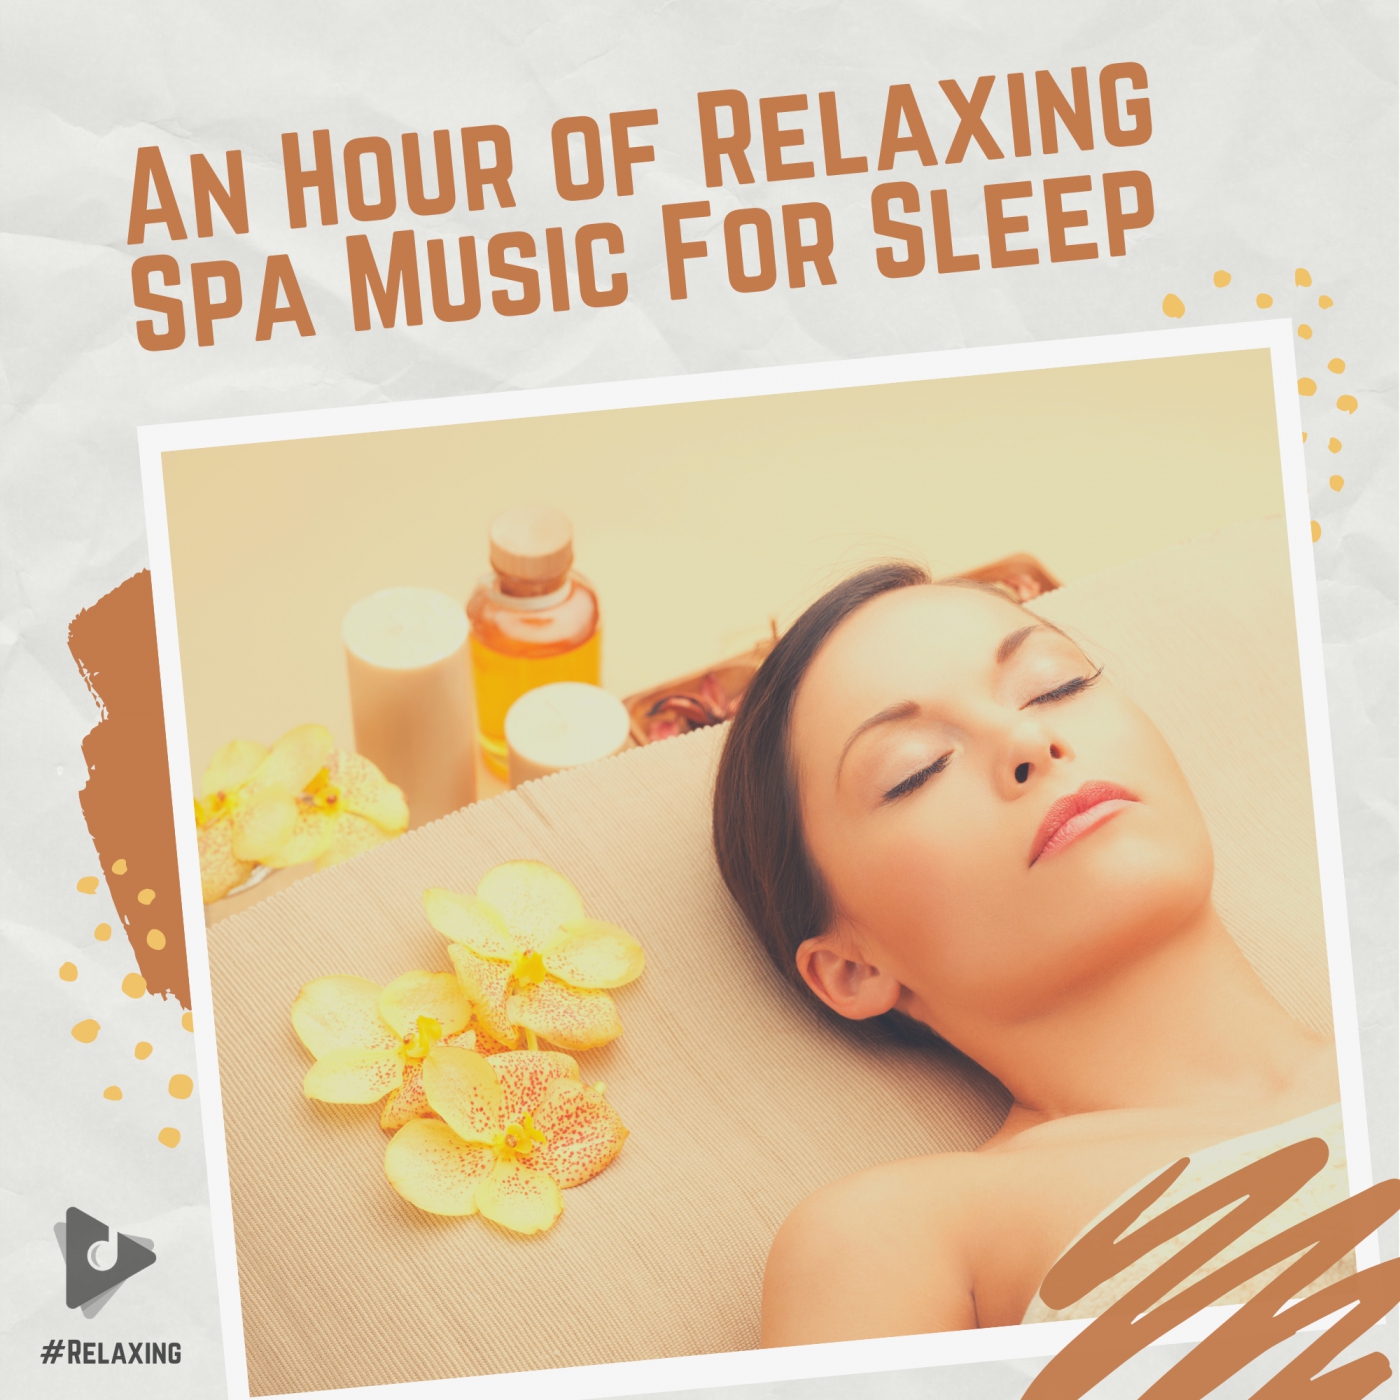 An Hour of Relaxing Spa Music For Sleep